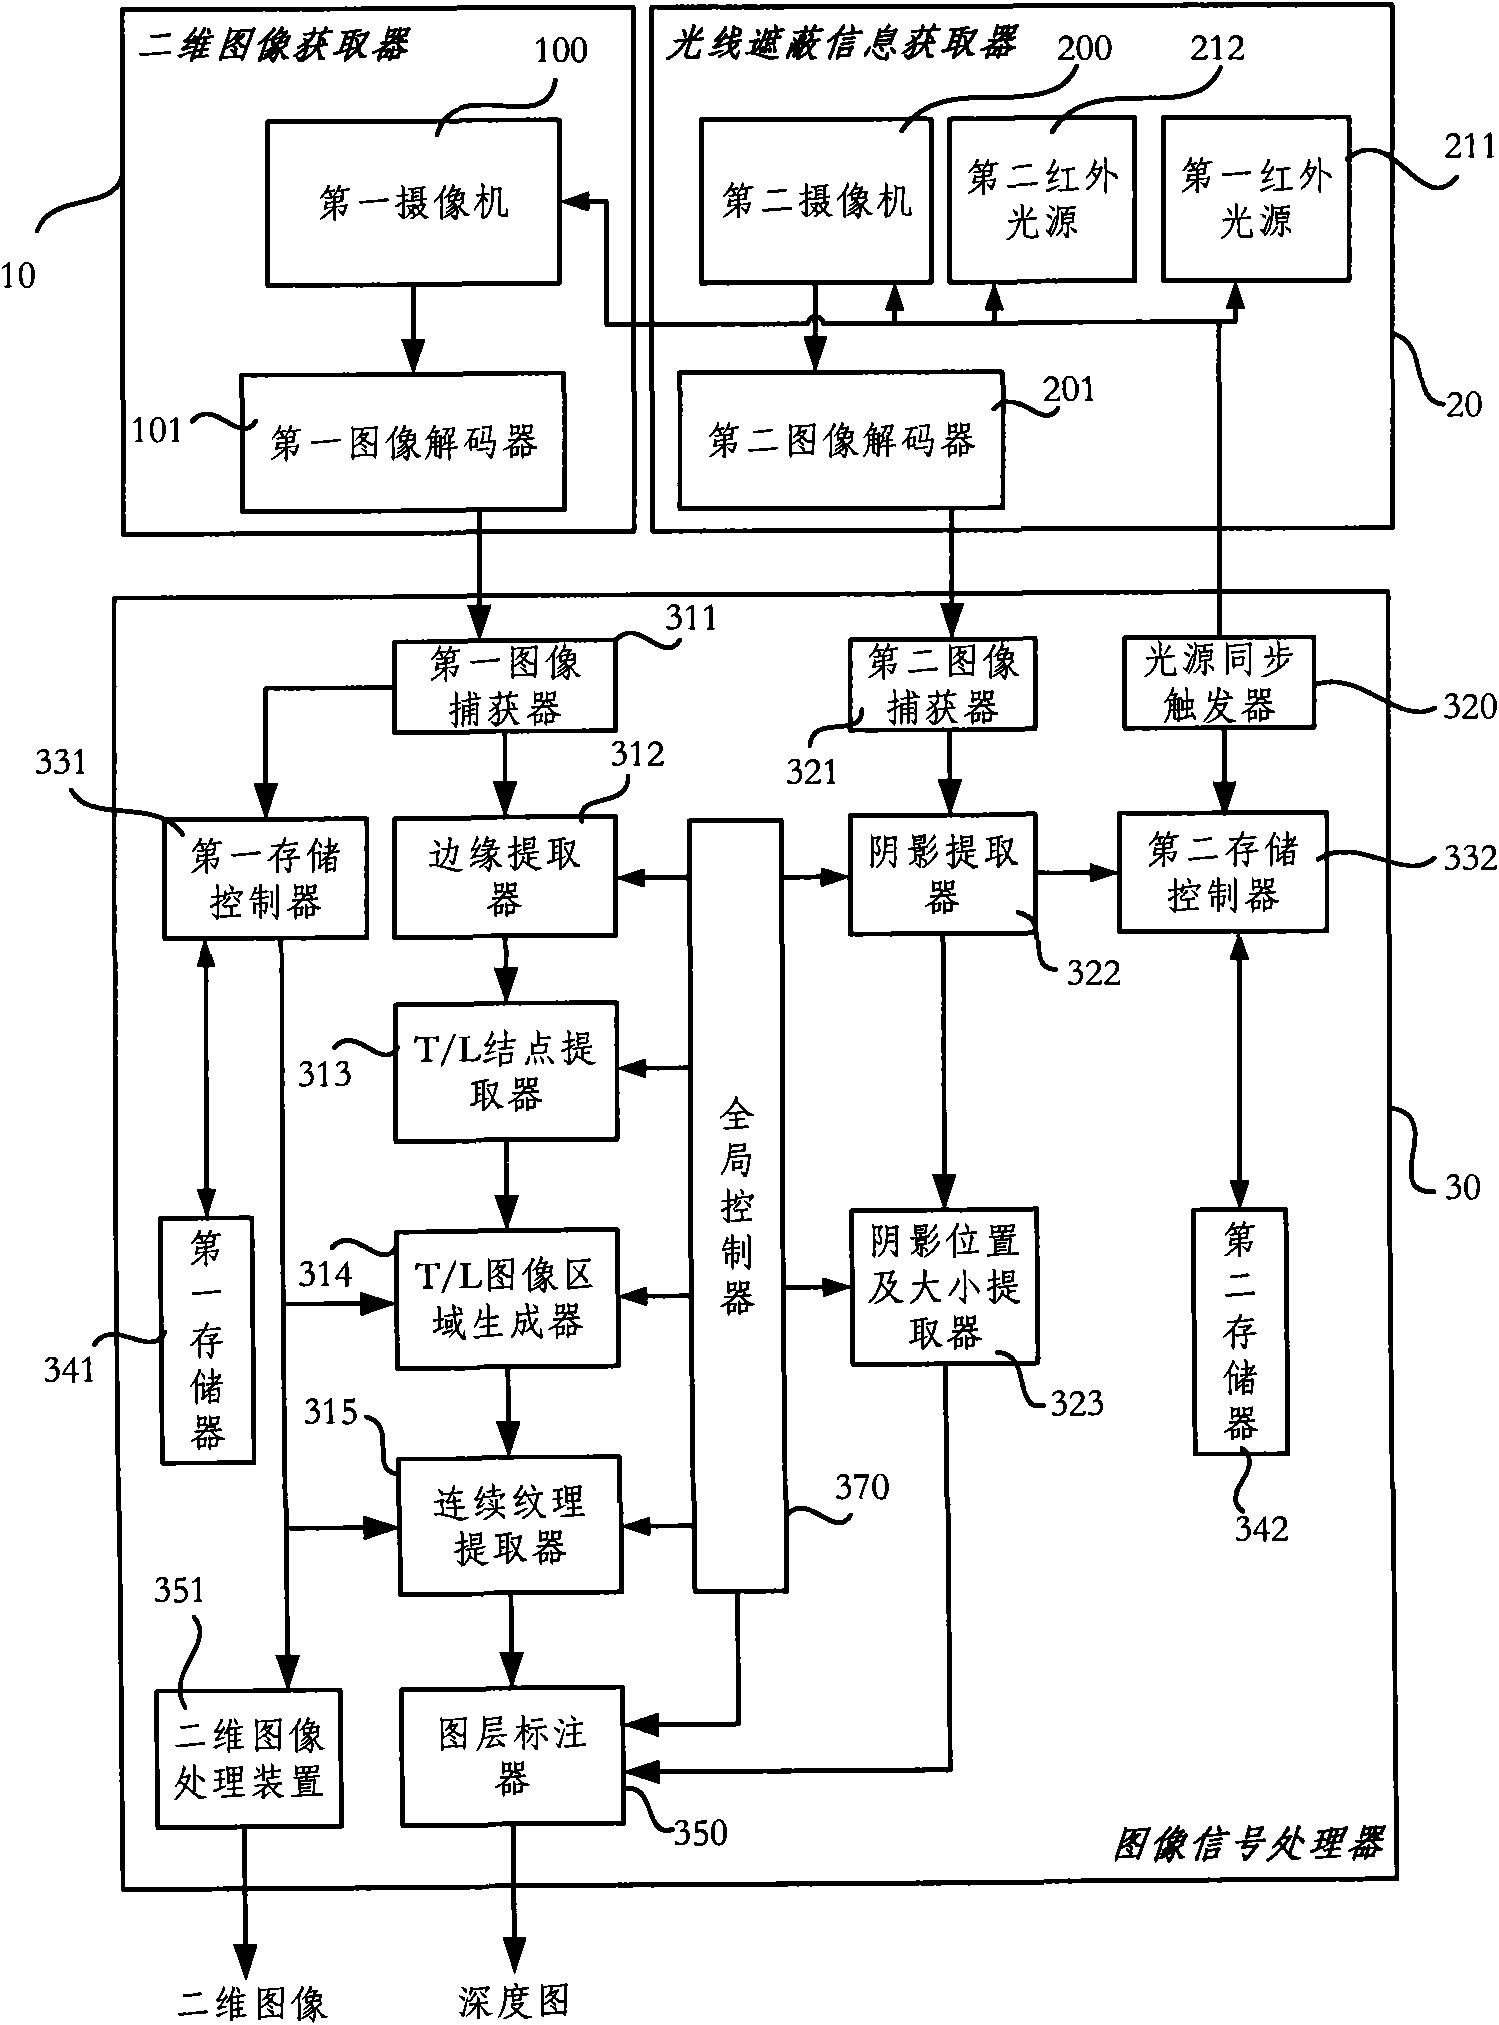 Image data generating system for stereo display